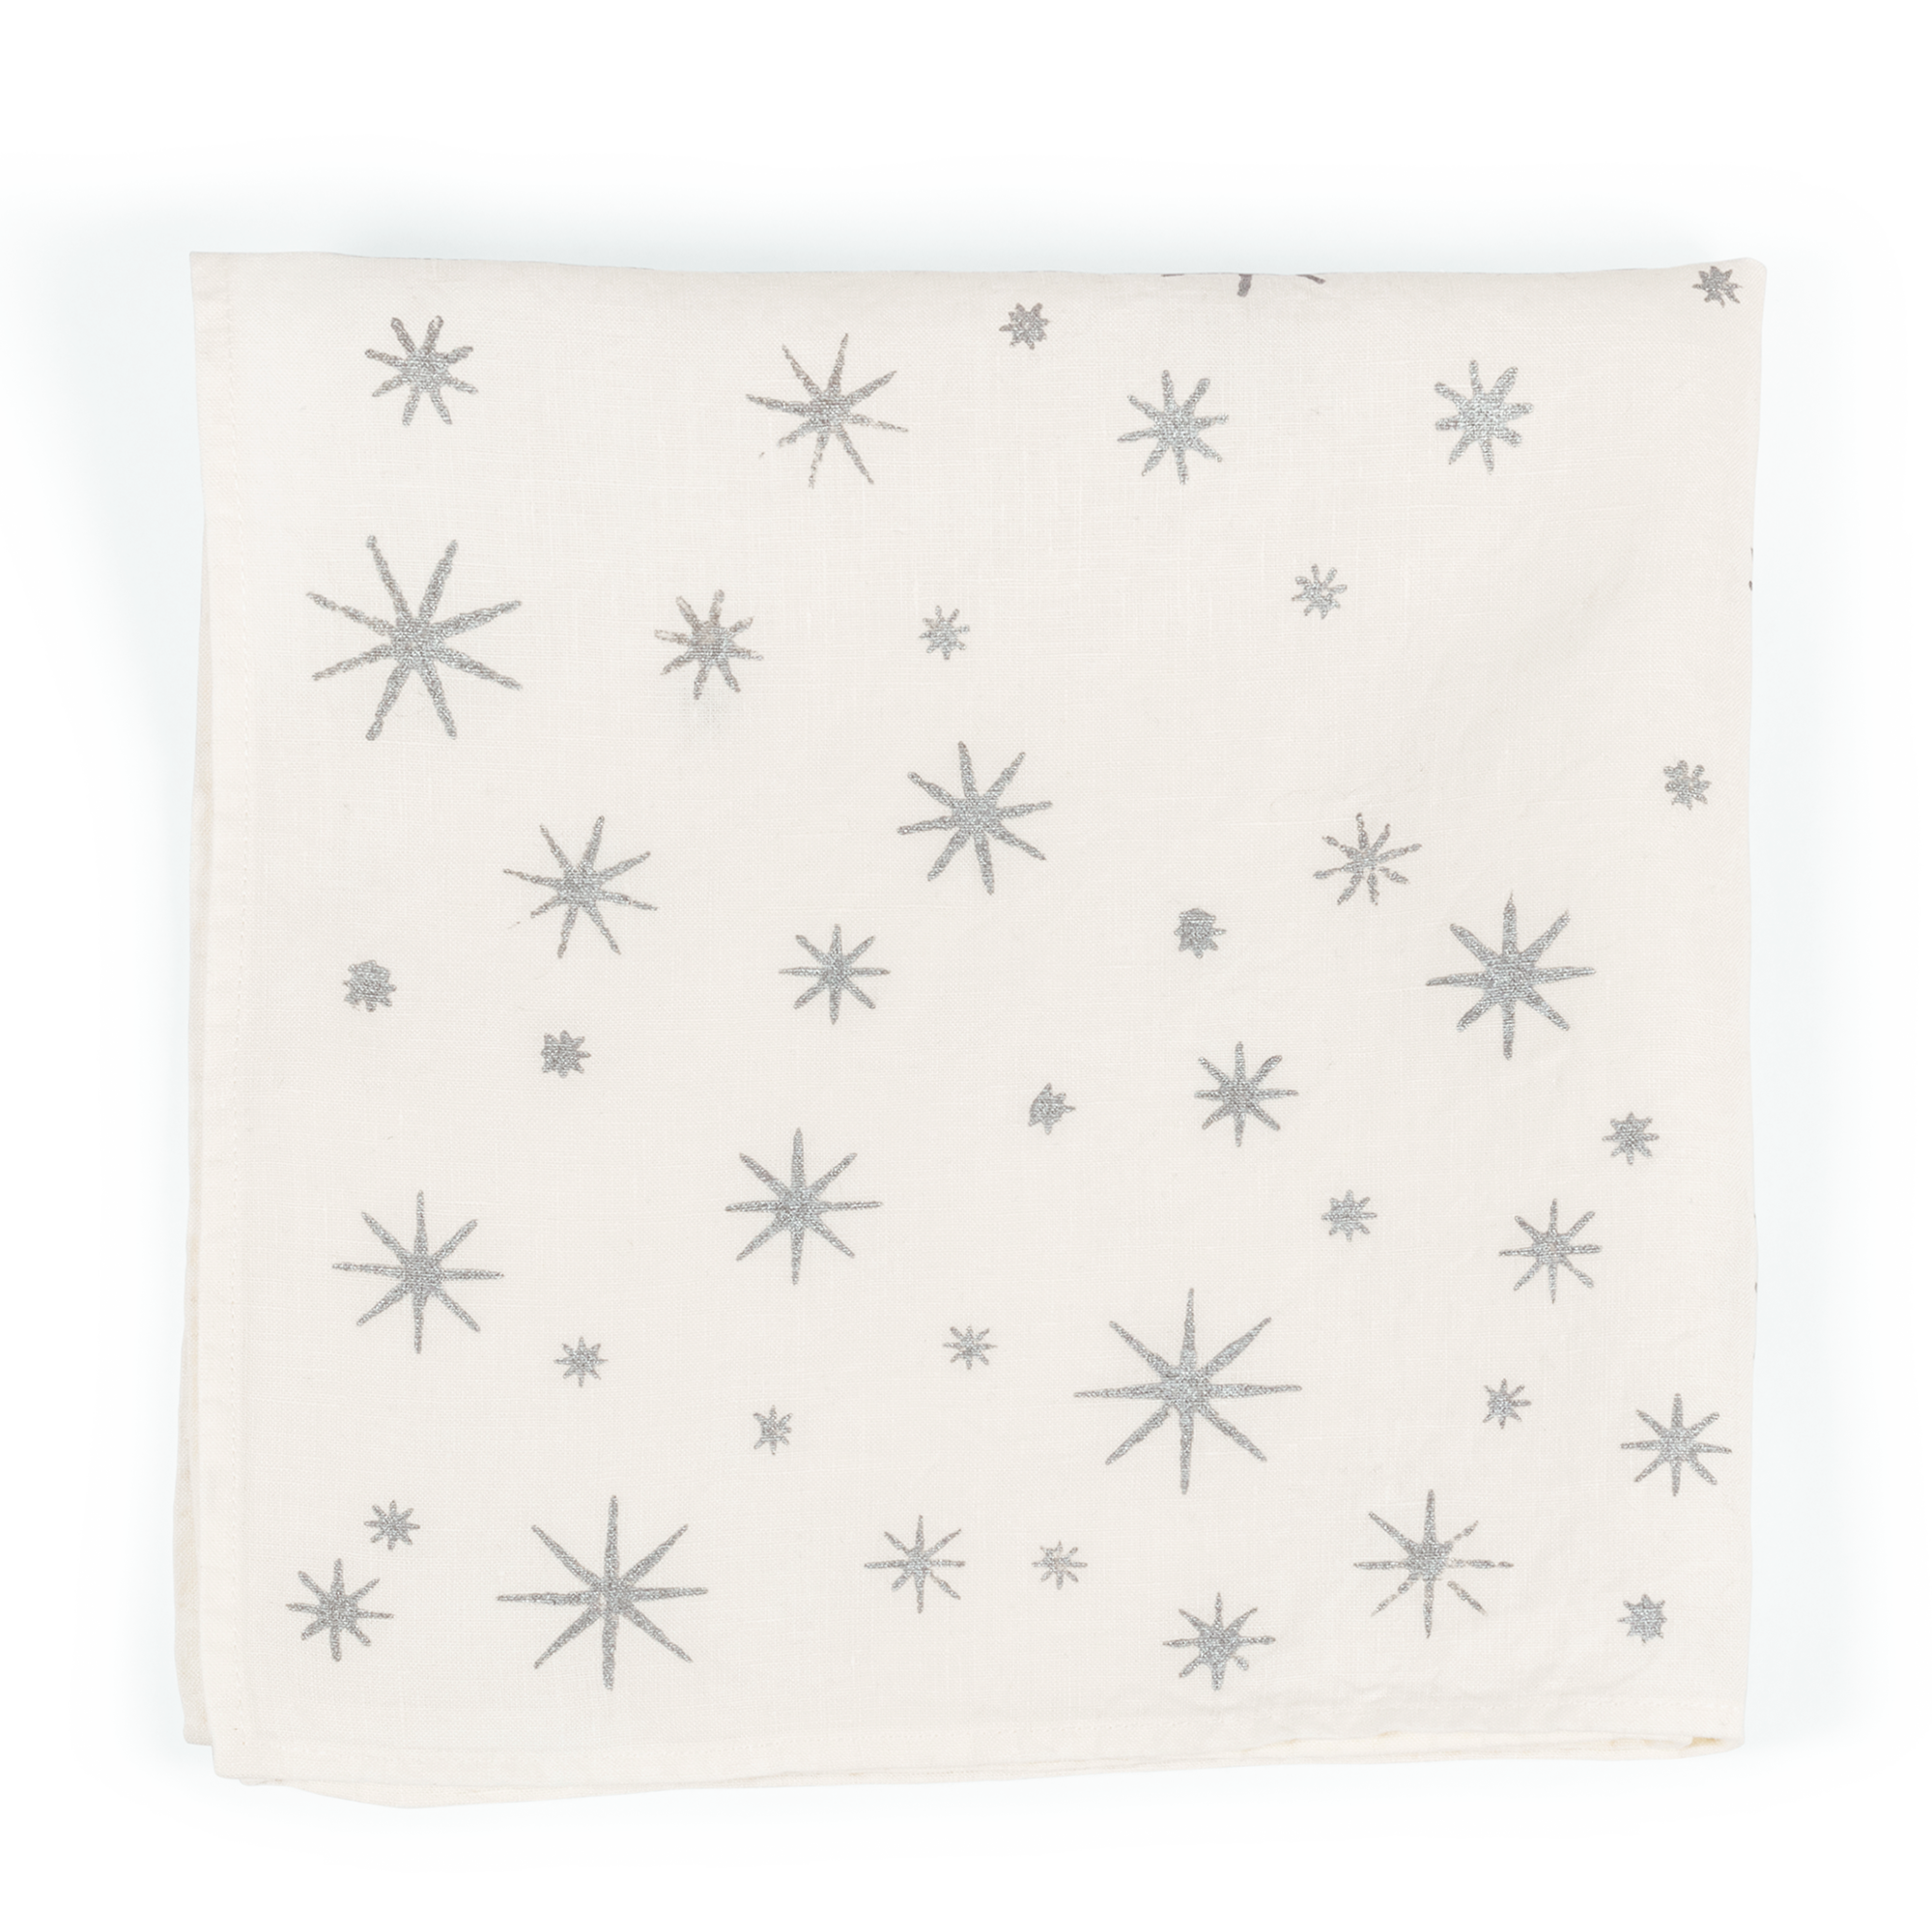 A luxurious white linen napkin with silver stars, perfect for adding a touch of elegance to any table setting.